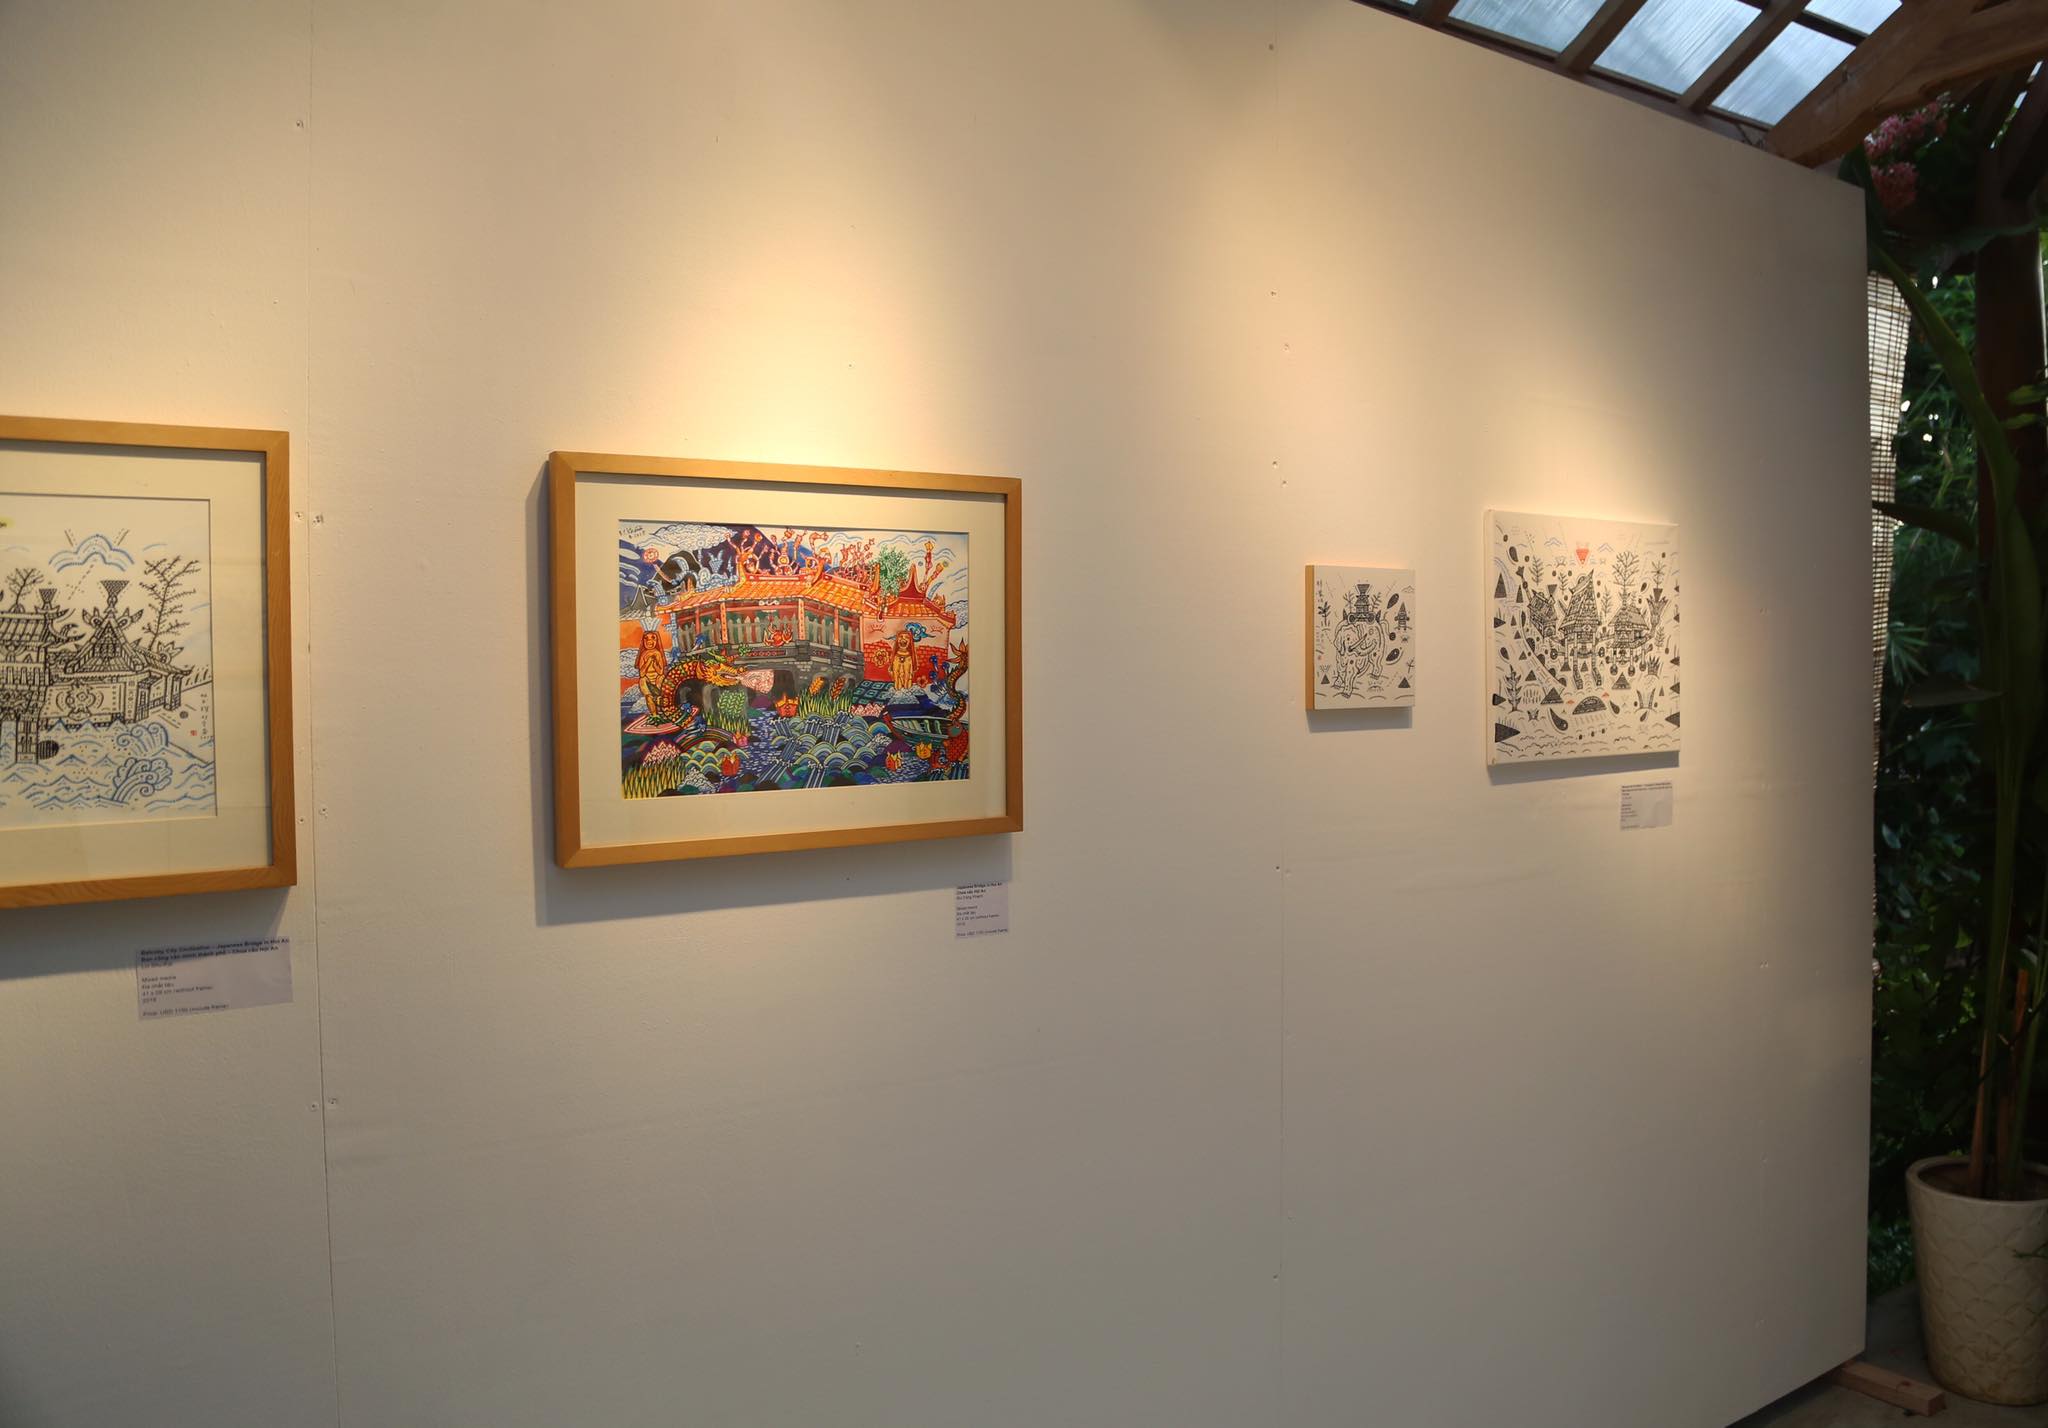 Artworks are displayed at the Molding Island City exhibition in Hoi An, central Vietnam